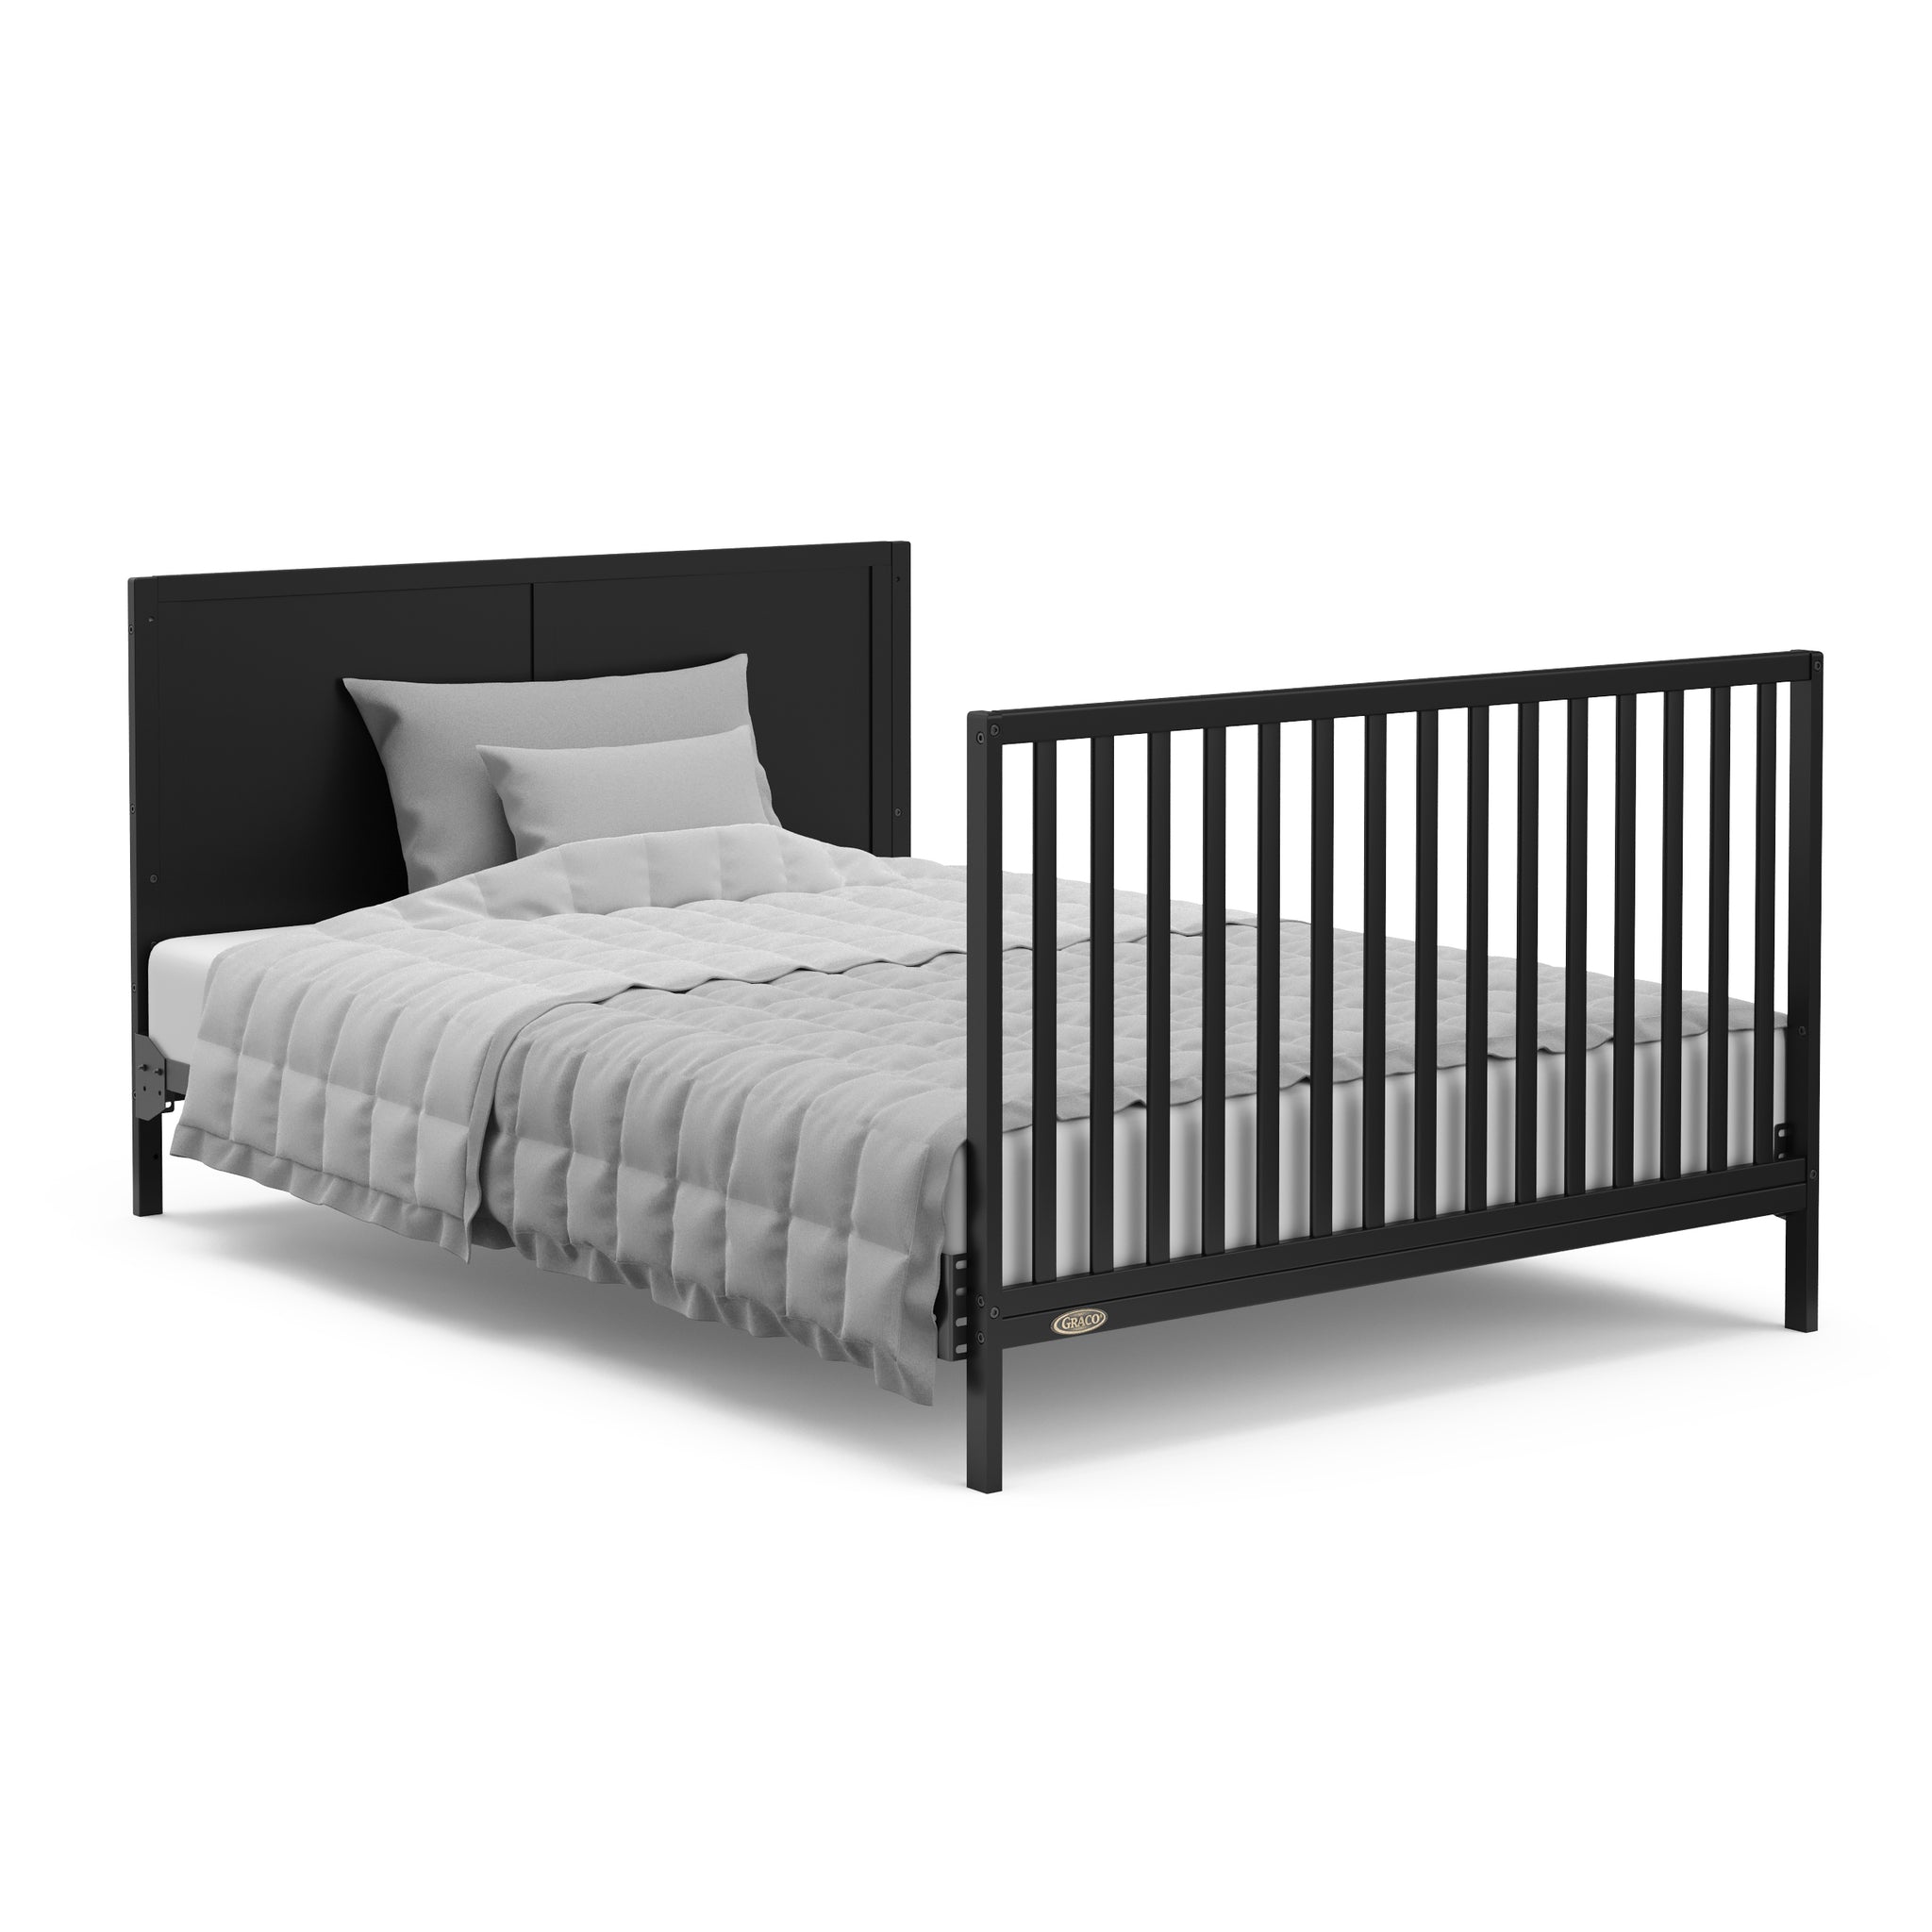 black crib with drawer in full-size bed with headboard and footboard